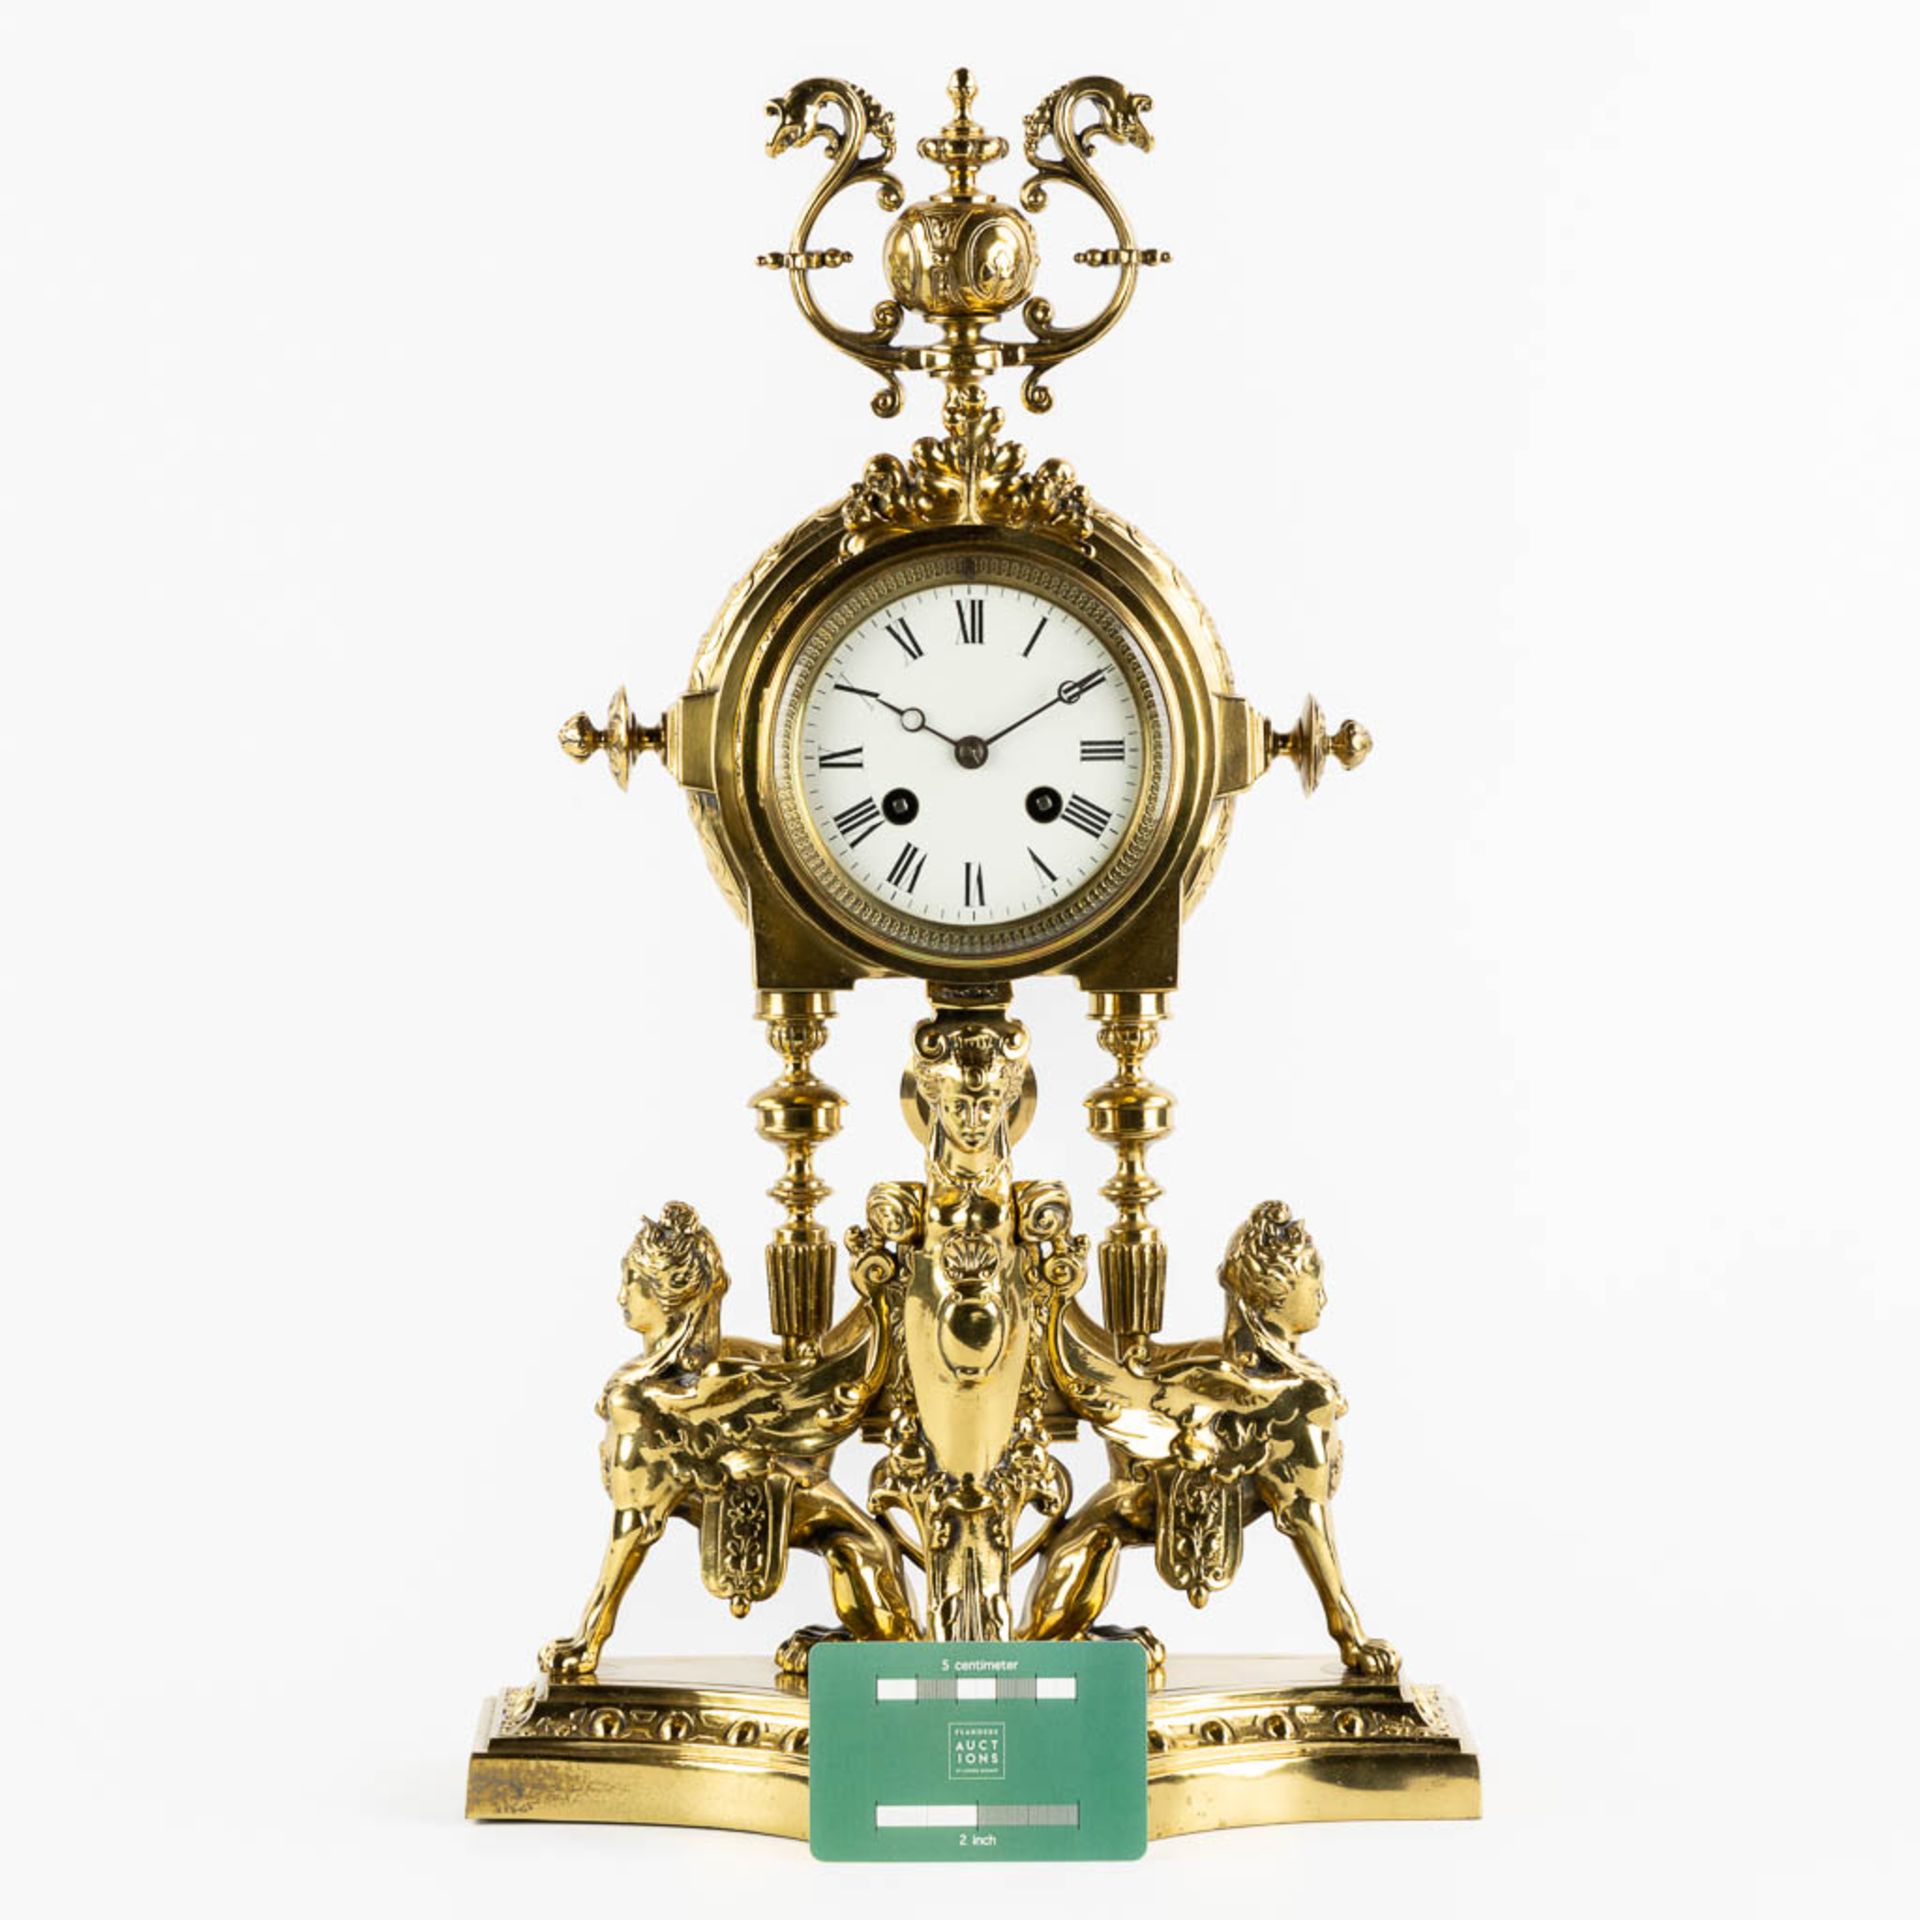 A mantle clock, polished bronze, decorated with Mythological Figures. Circa 1880. (L:15 x W:26 x H:4 - Image 2 of 12